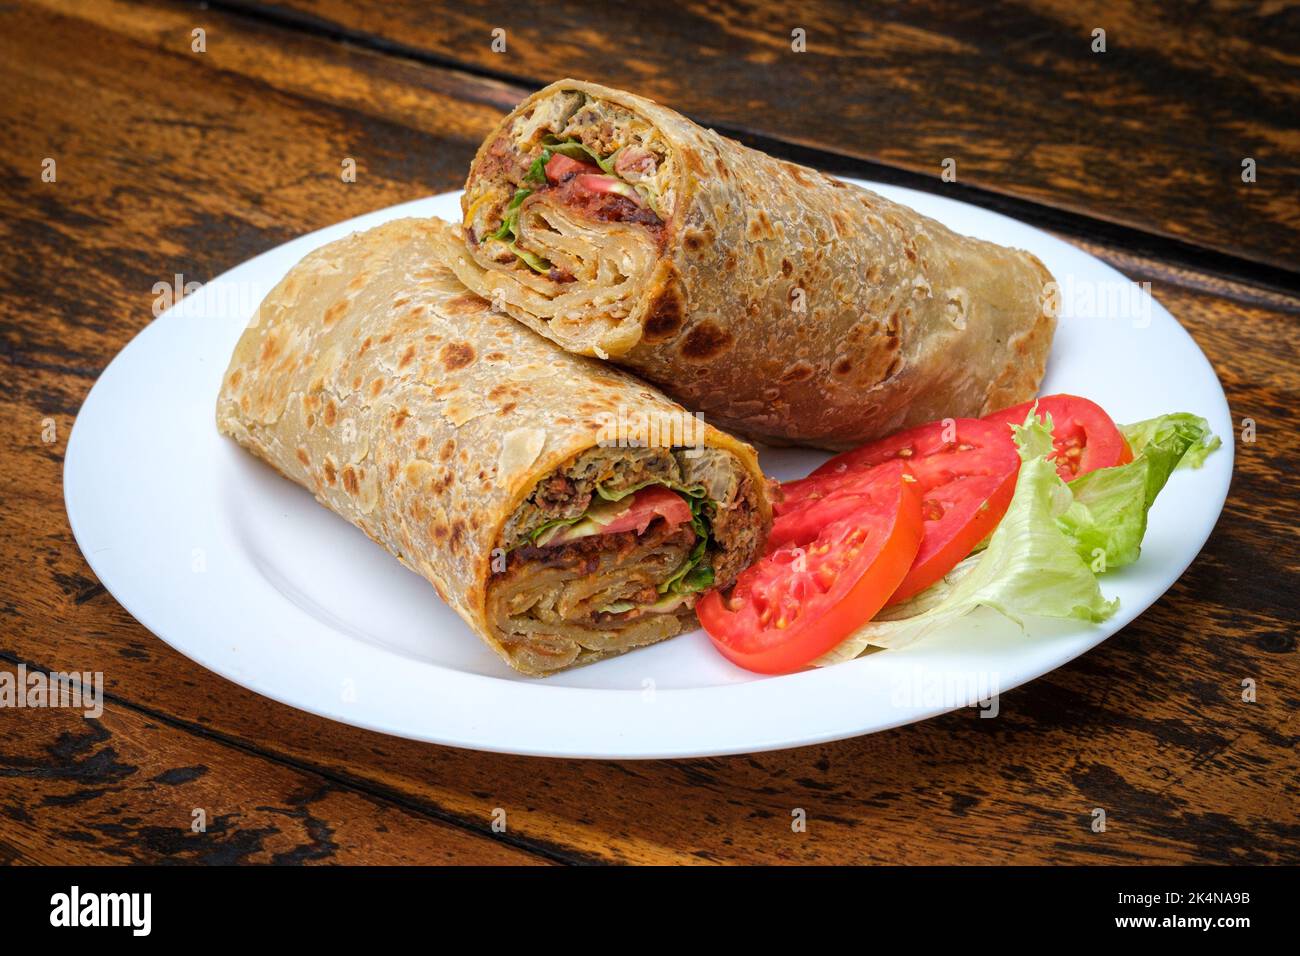 Ugandan Rolex, commonly referred to Rolex, is a popular item in Uganda, combining an egg omelette and vegetables wrapped in a chapati Stock Photo - Alamy